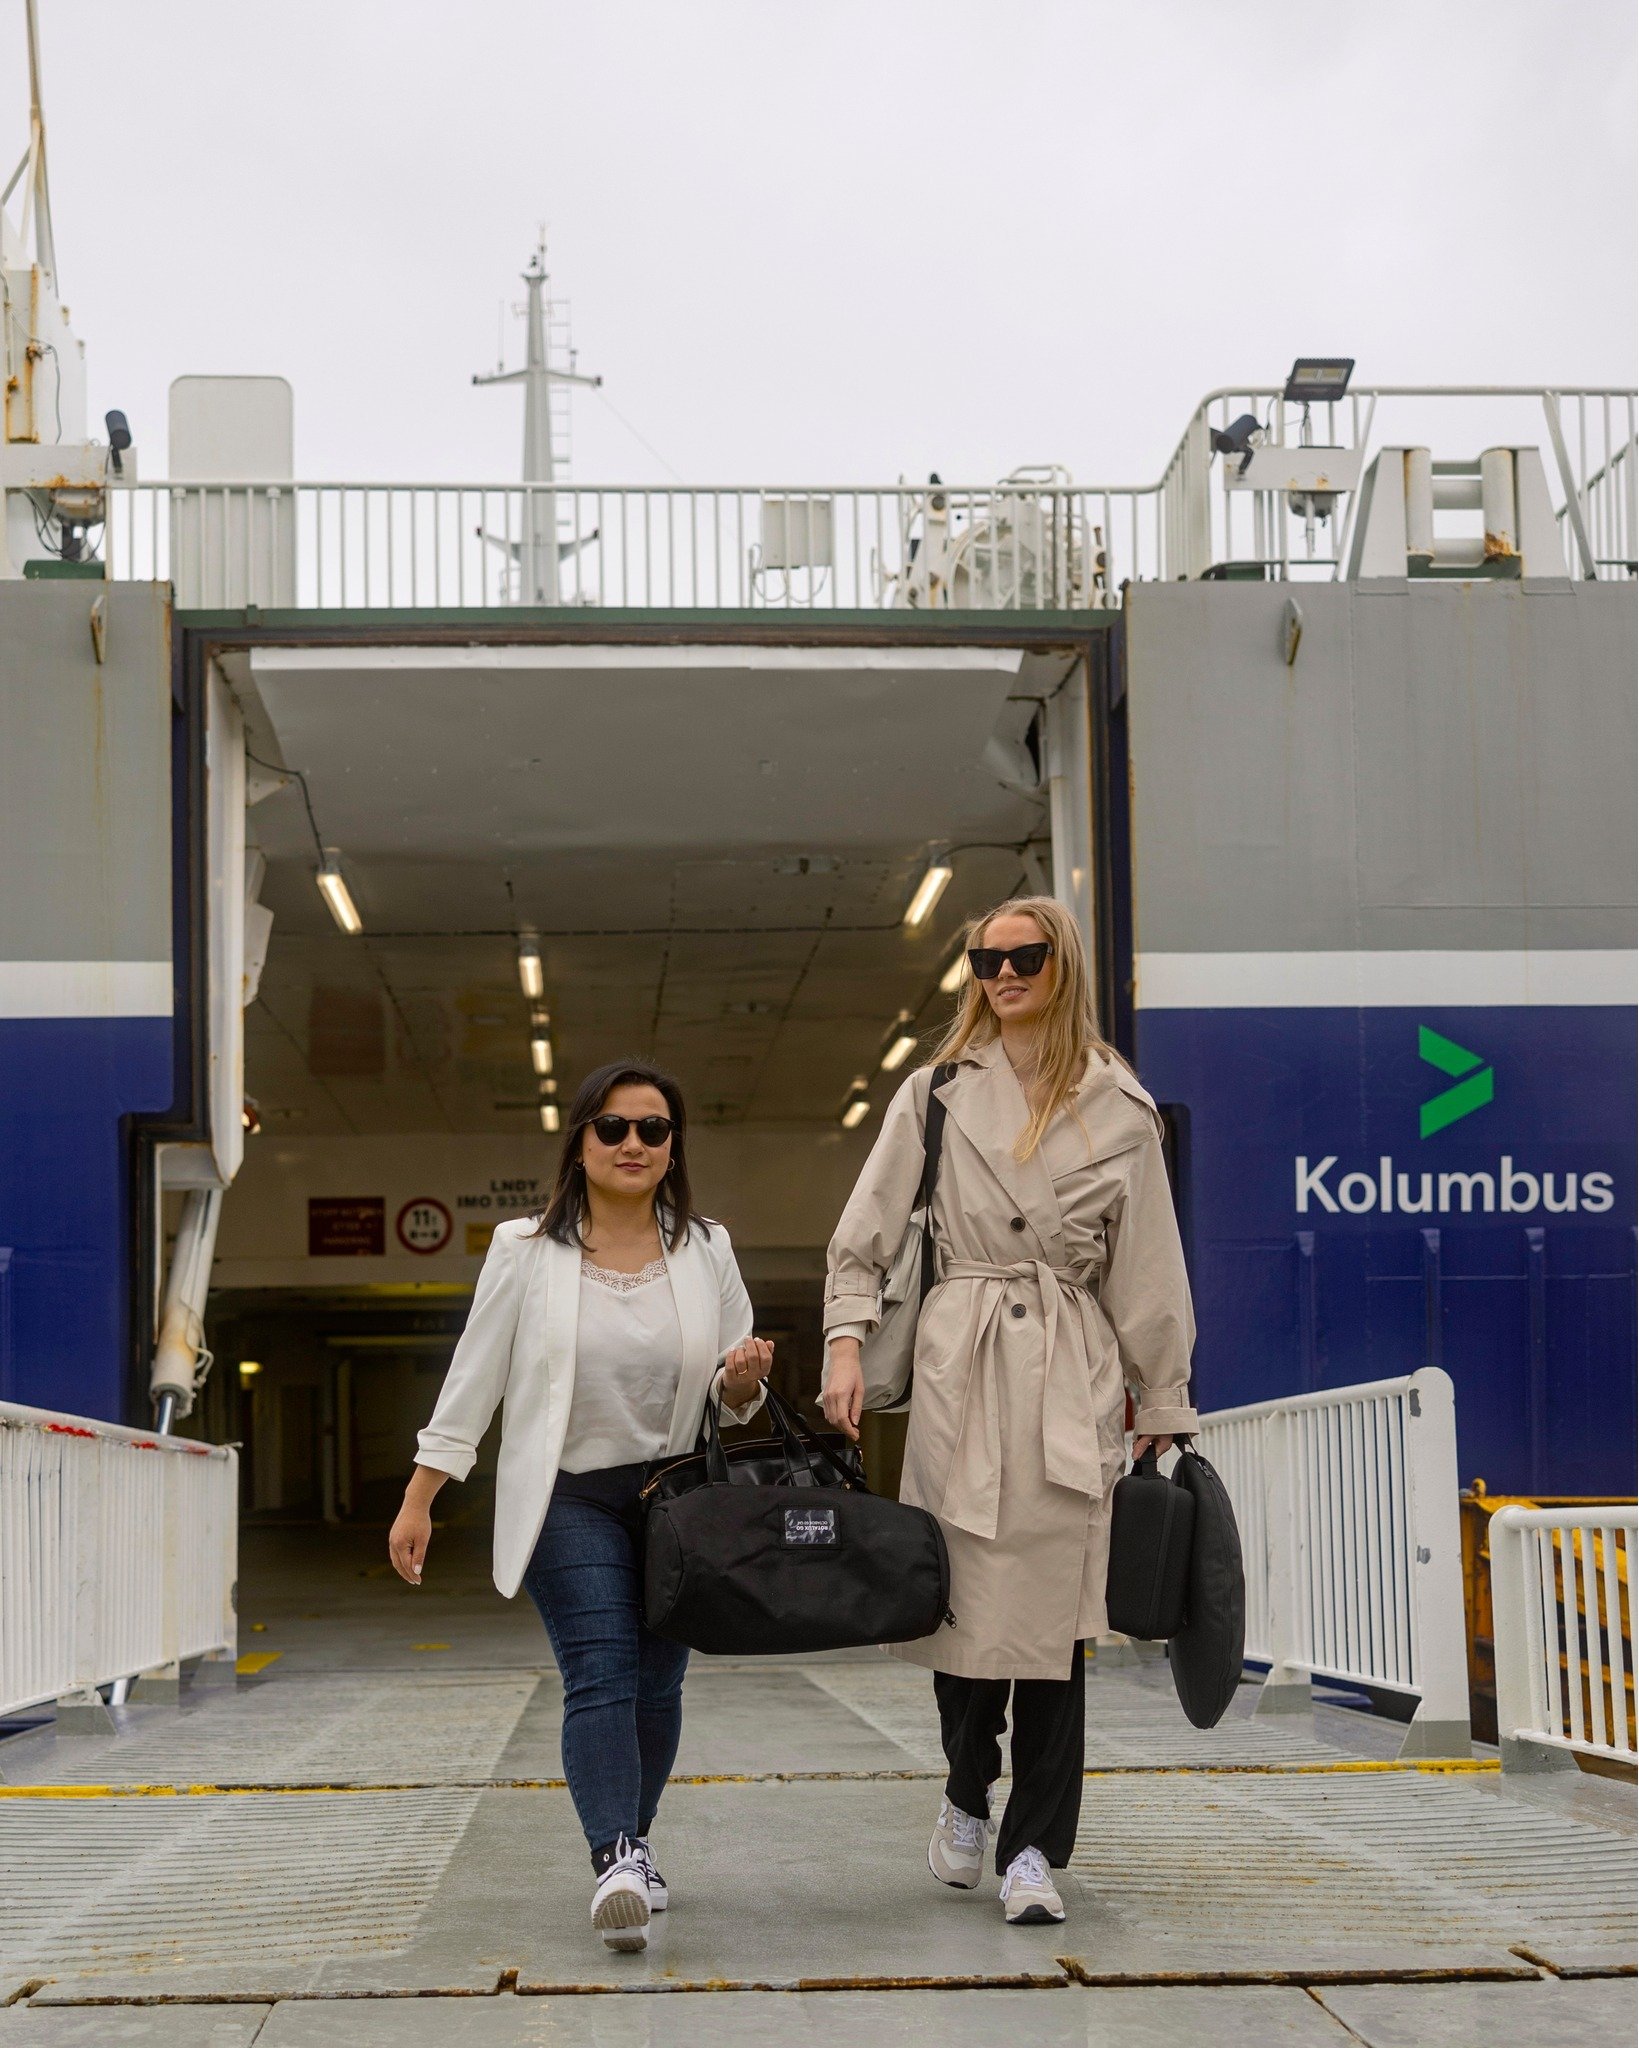 You think marketing is like &quot;Emily in Paris&quot; 💅, but in reality it's Vy in Norway - seasick on a ferry to an offshore test center...😬

We profiled/branded this ferry for a client, who sponsored a trip to the MetCentre - A world-leading tes